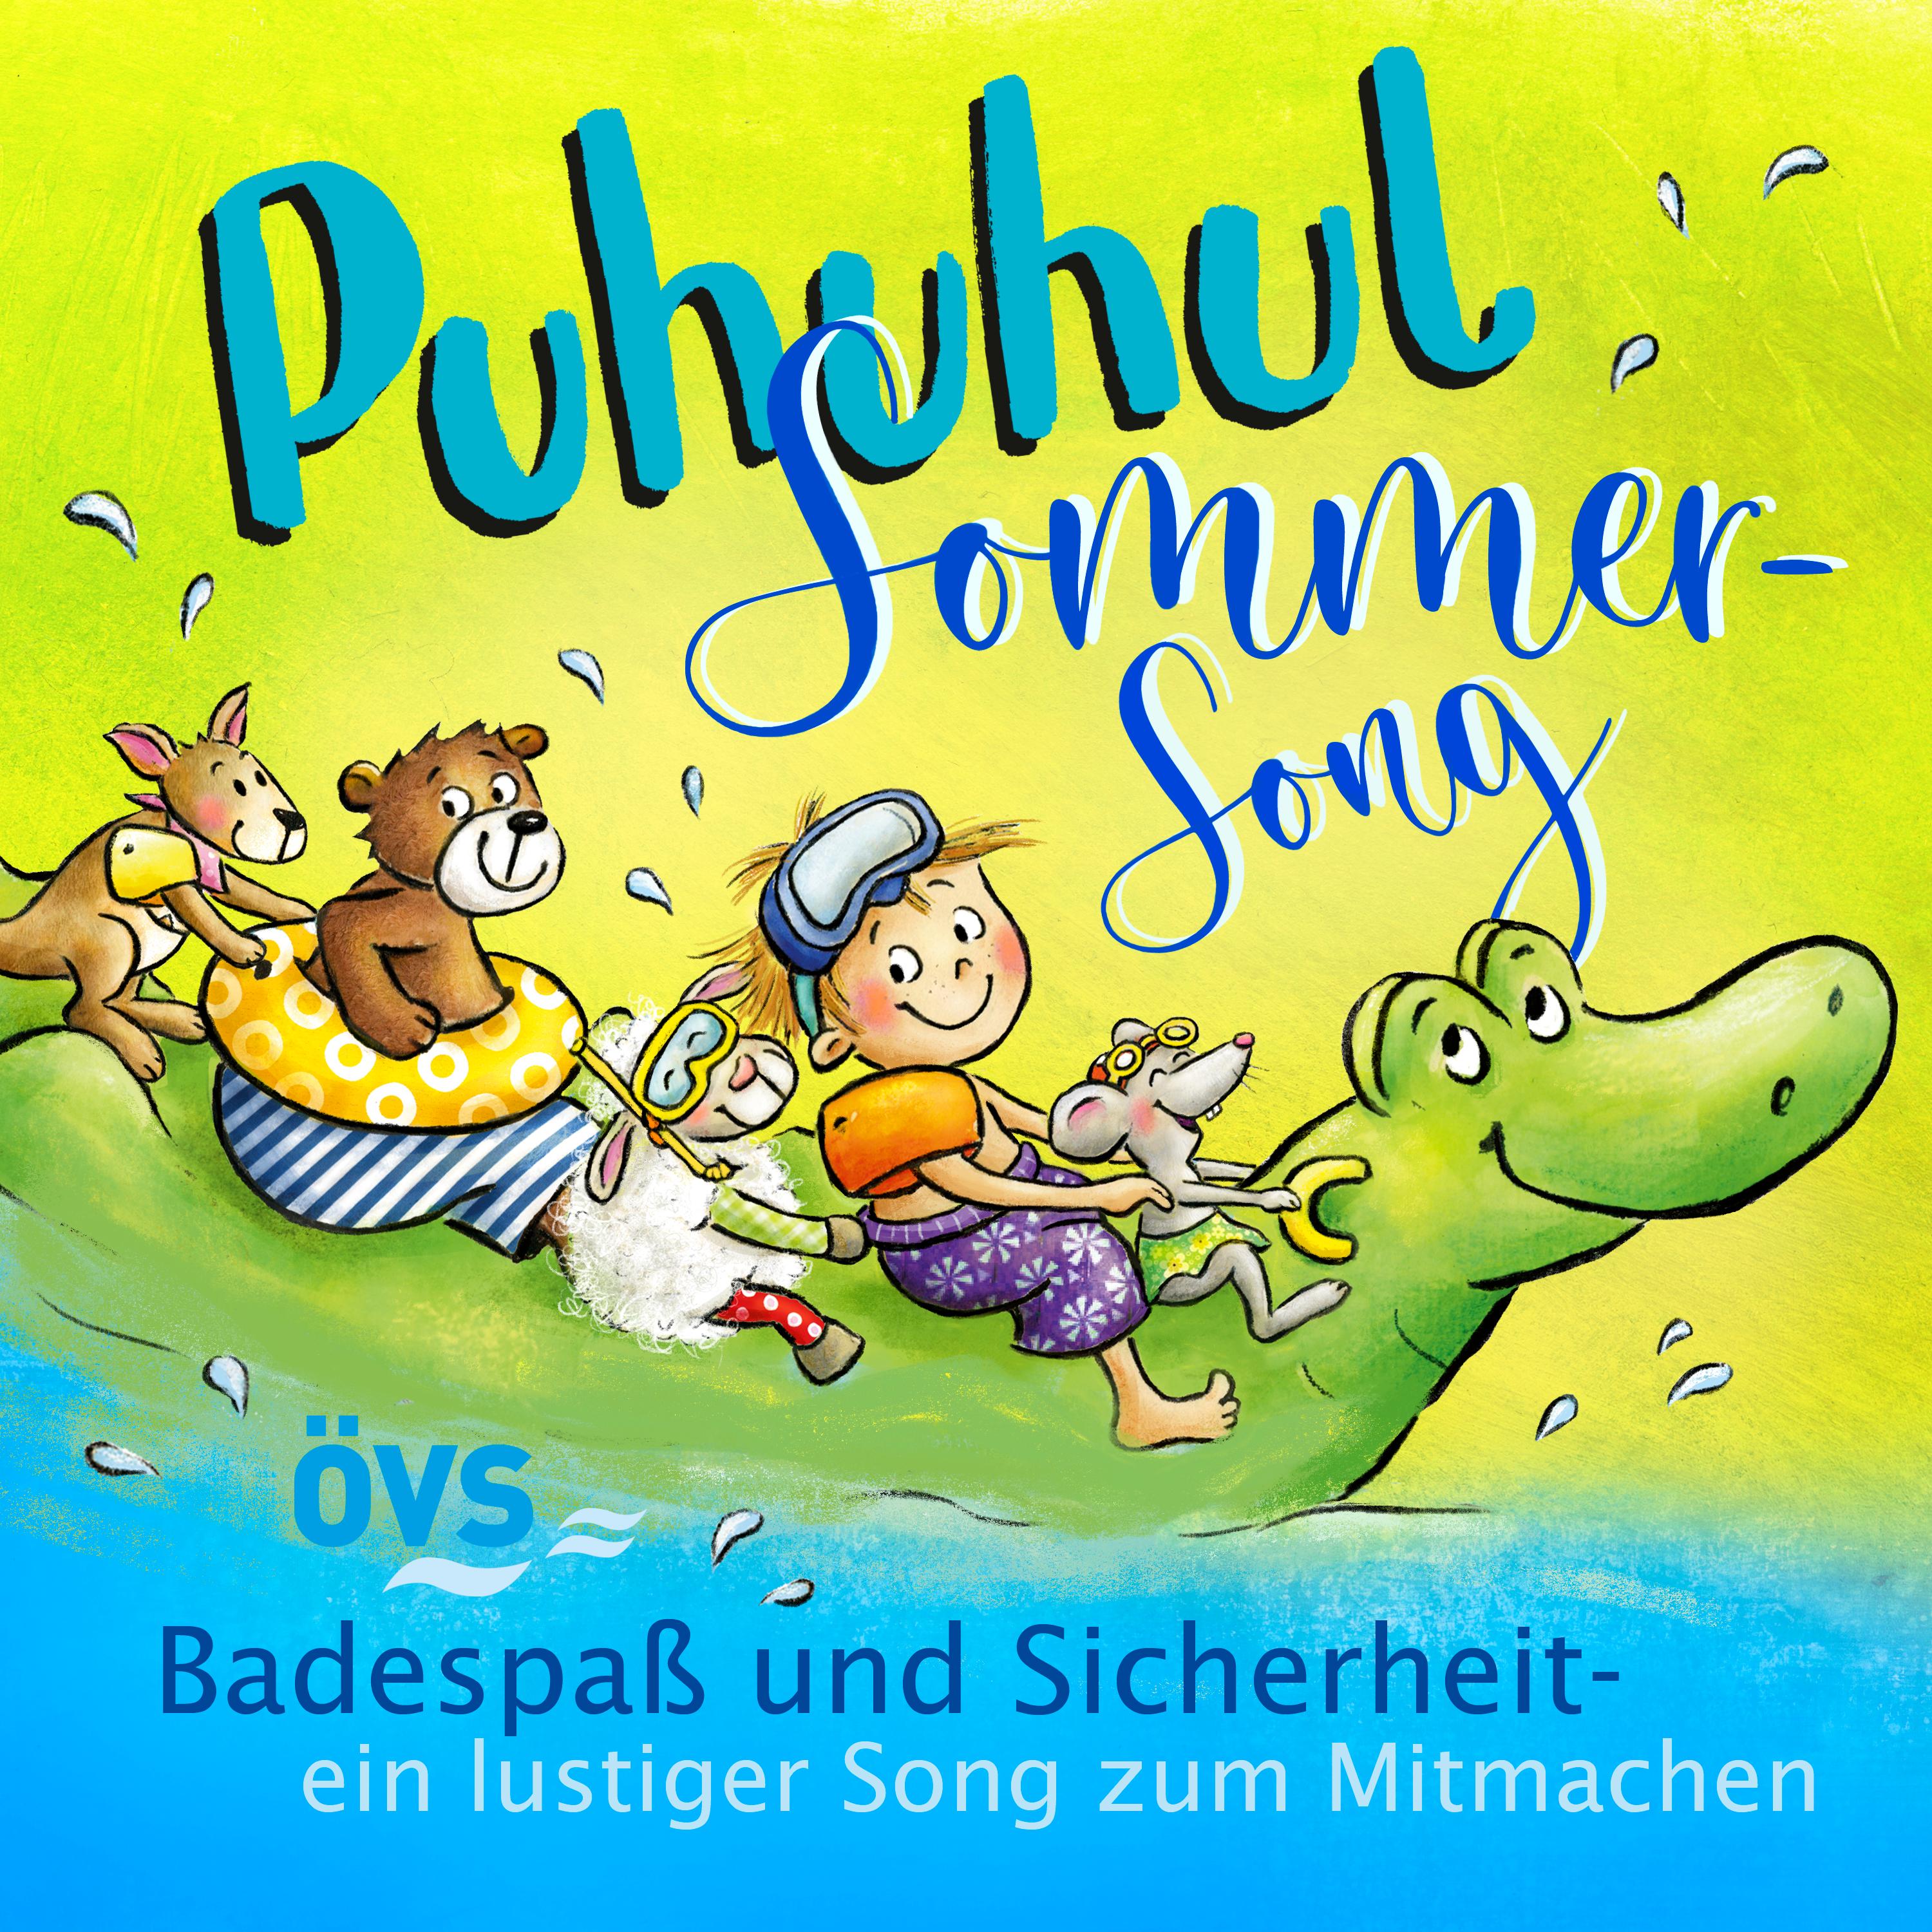 Album-Cover des Sommersongs